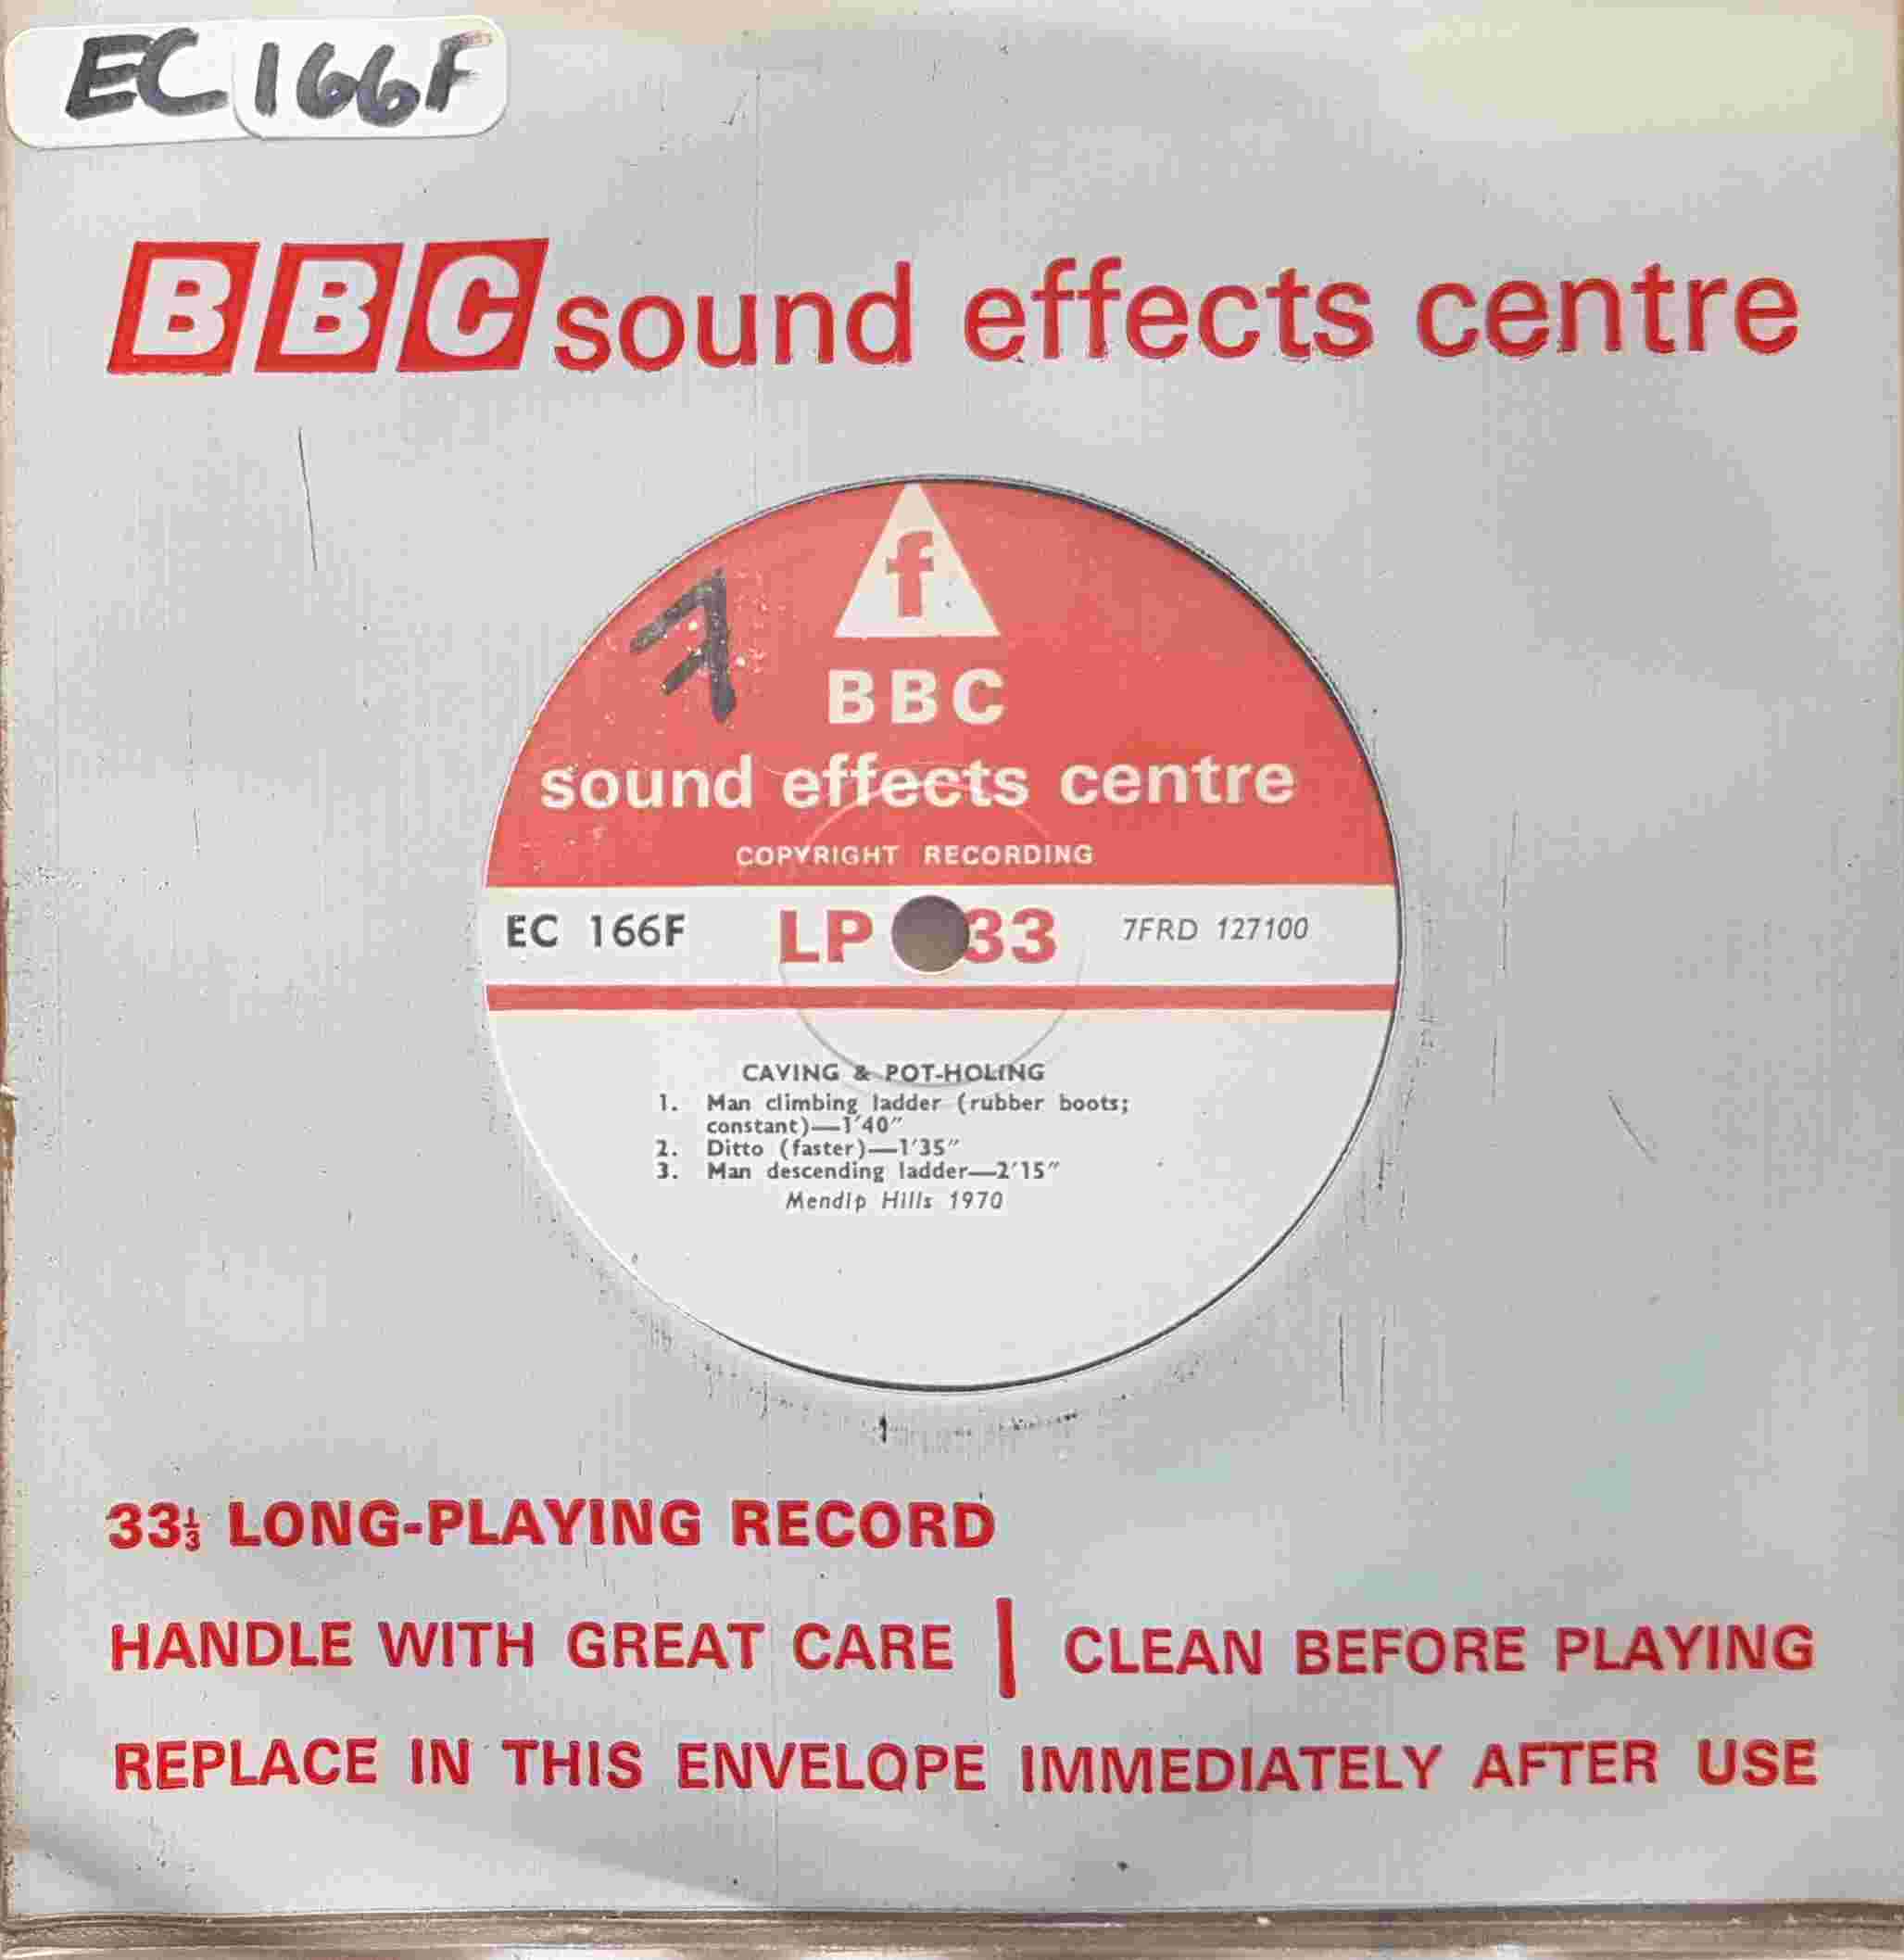 Picture of EC 166F Caving & pot-holing by artist Not registered from the BBC singles - Records and Tapes library